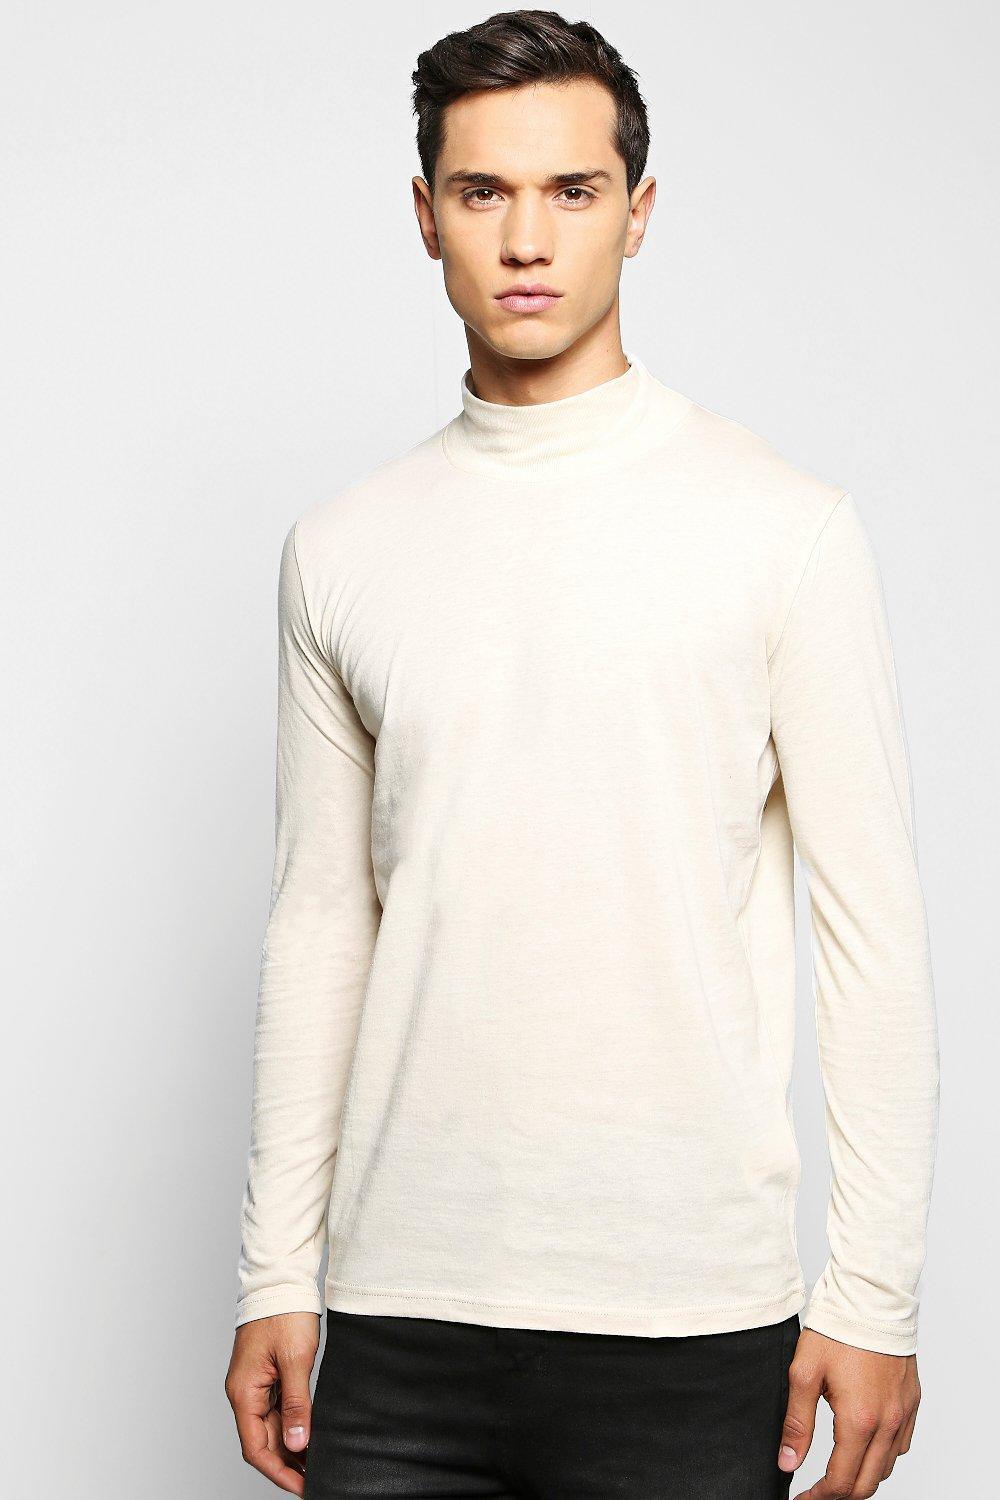 Lyst - Boohoo Long Sleeve High Neck T Shirt in Natural for Men